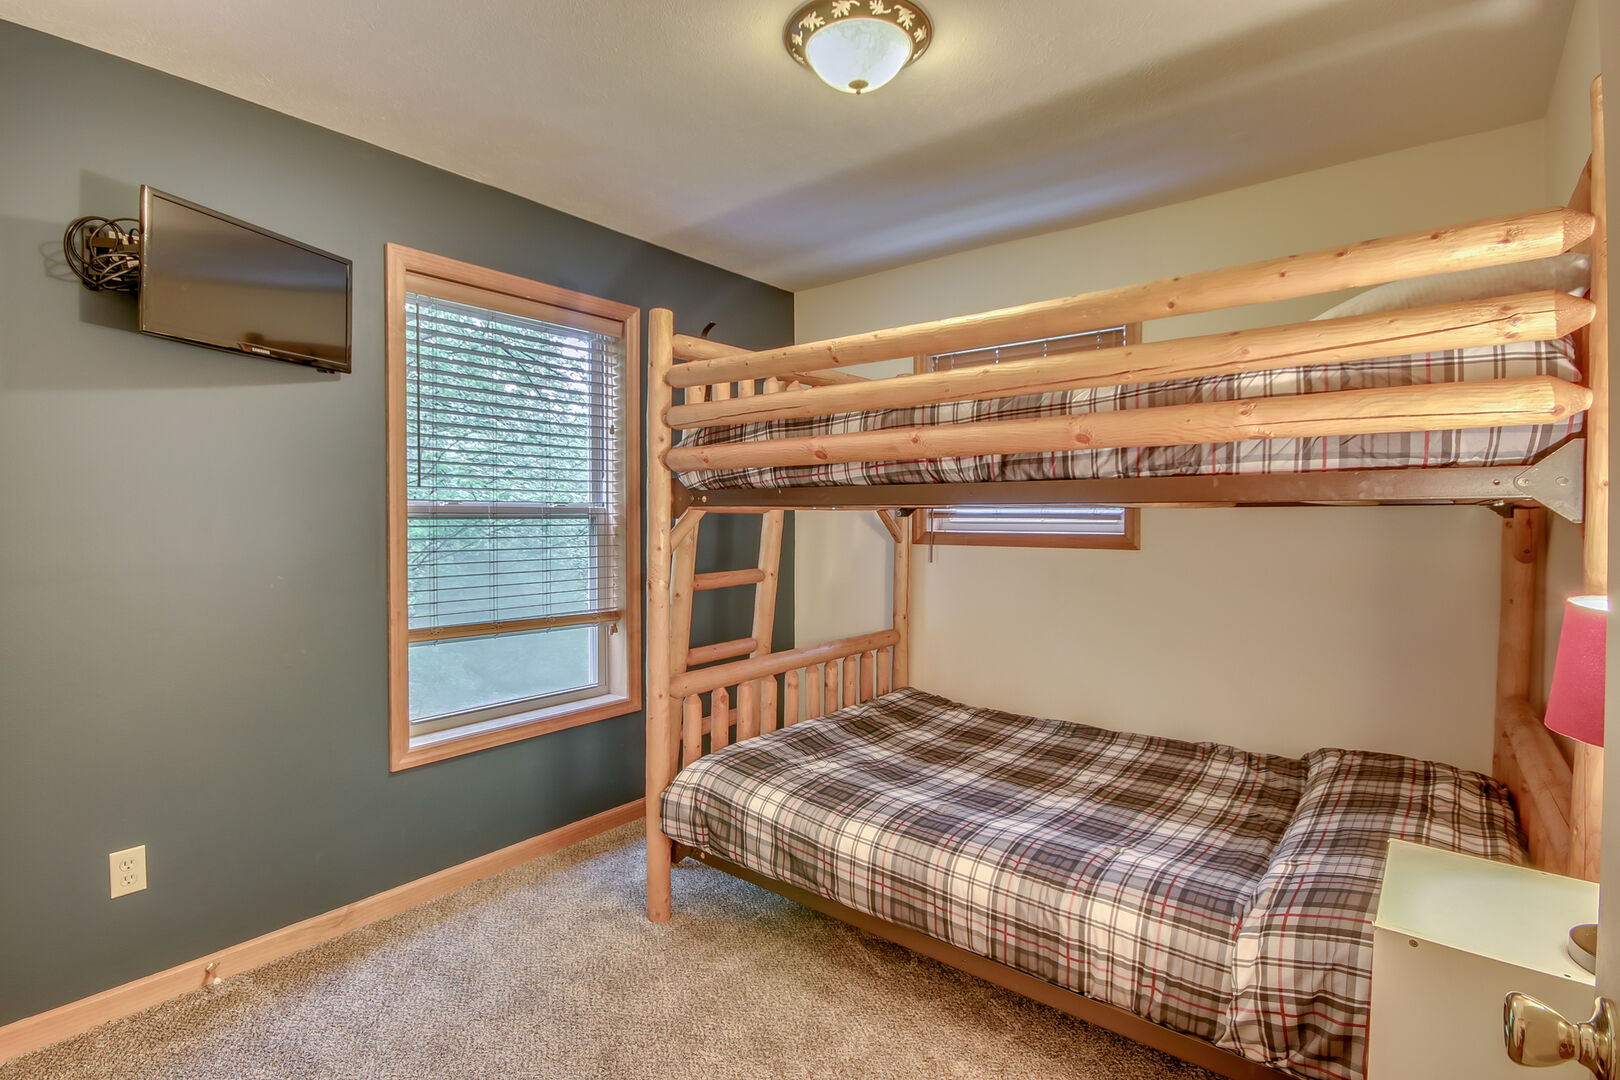 An Image of a Wooden Bunk Bed  and TV on the Wall of Bedroom.